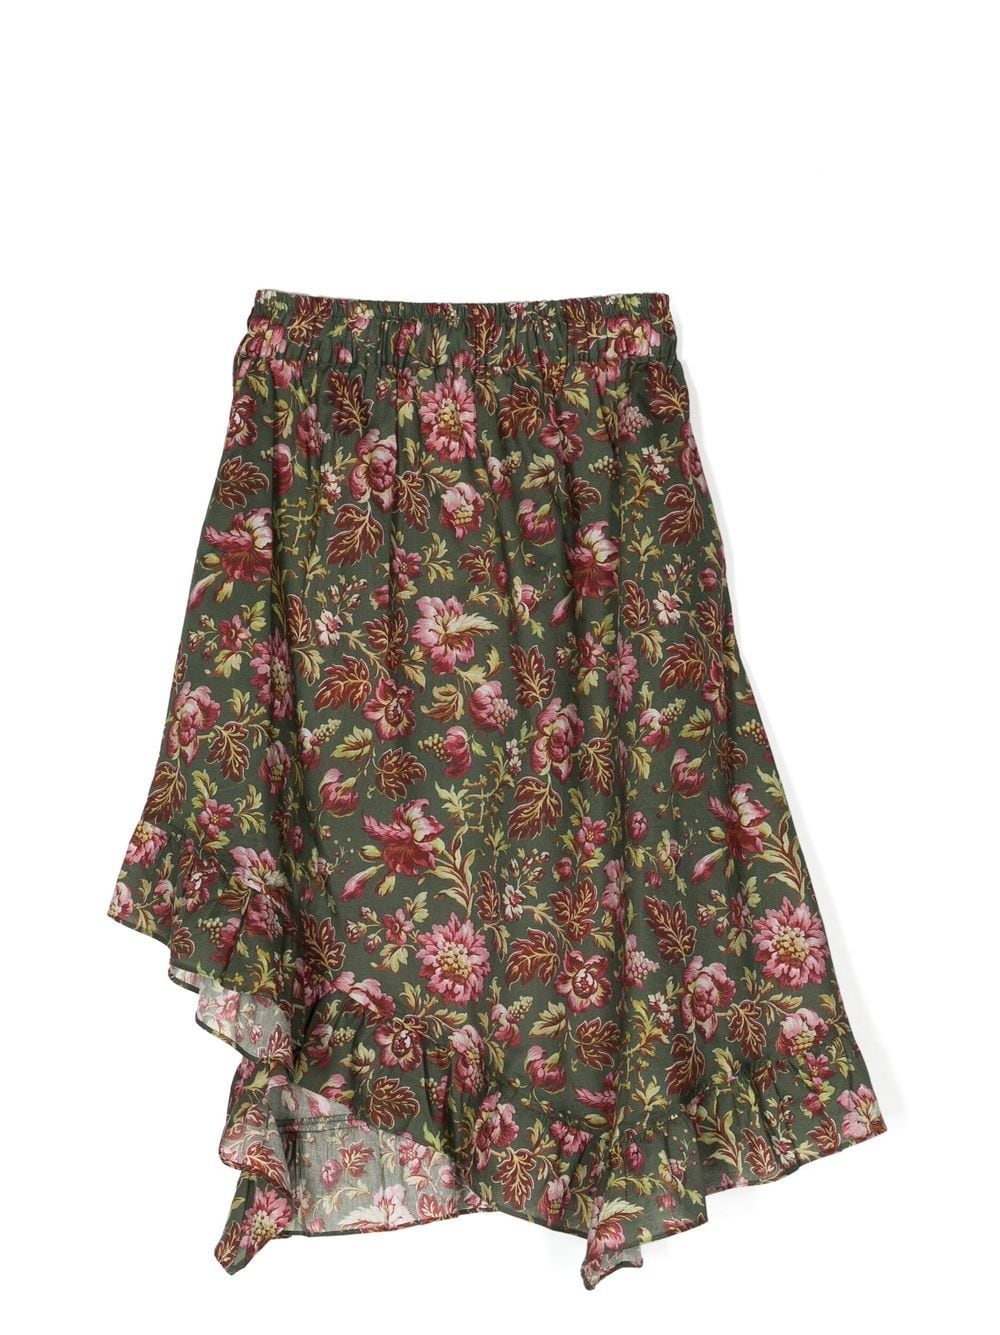 By Walid x Kindred floral-print high-low hem skirt - Green von By Walid